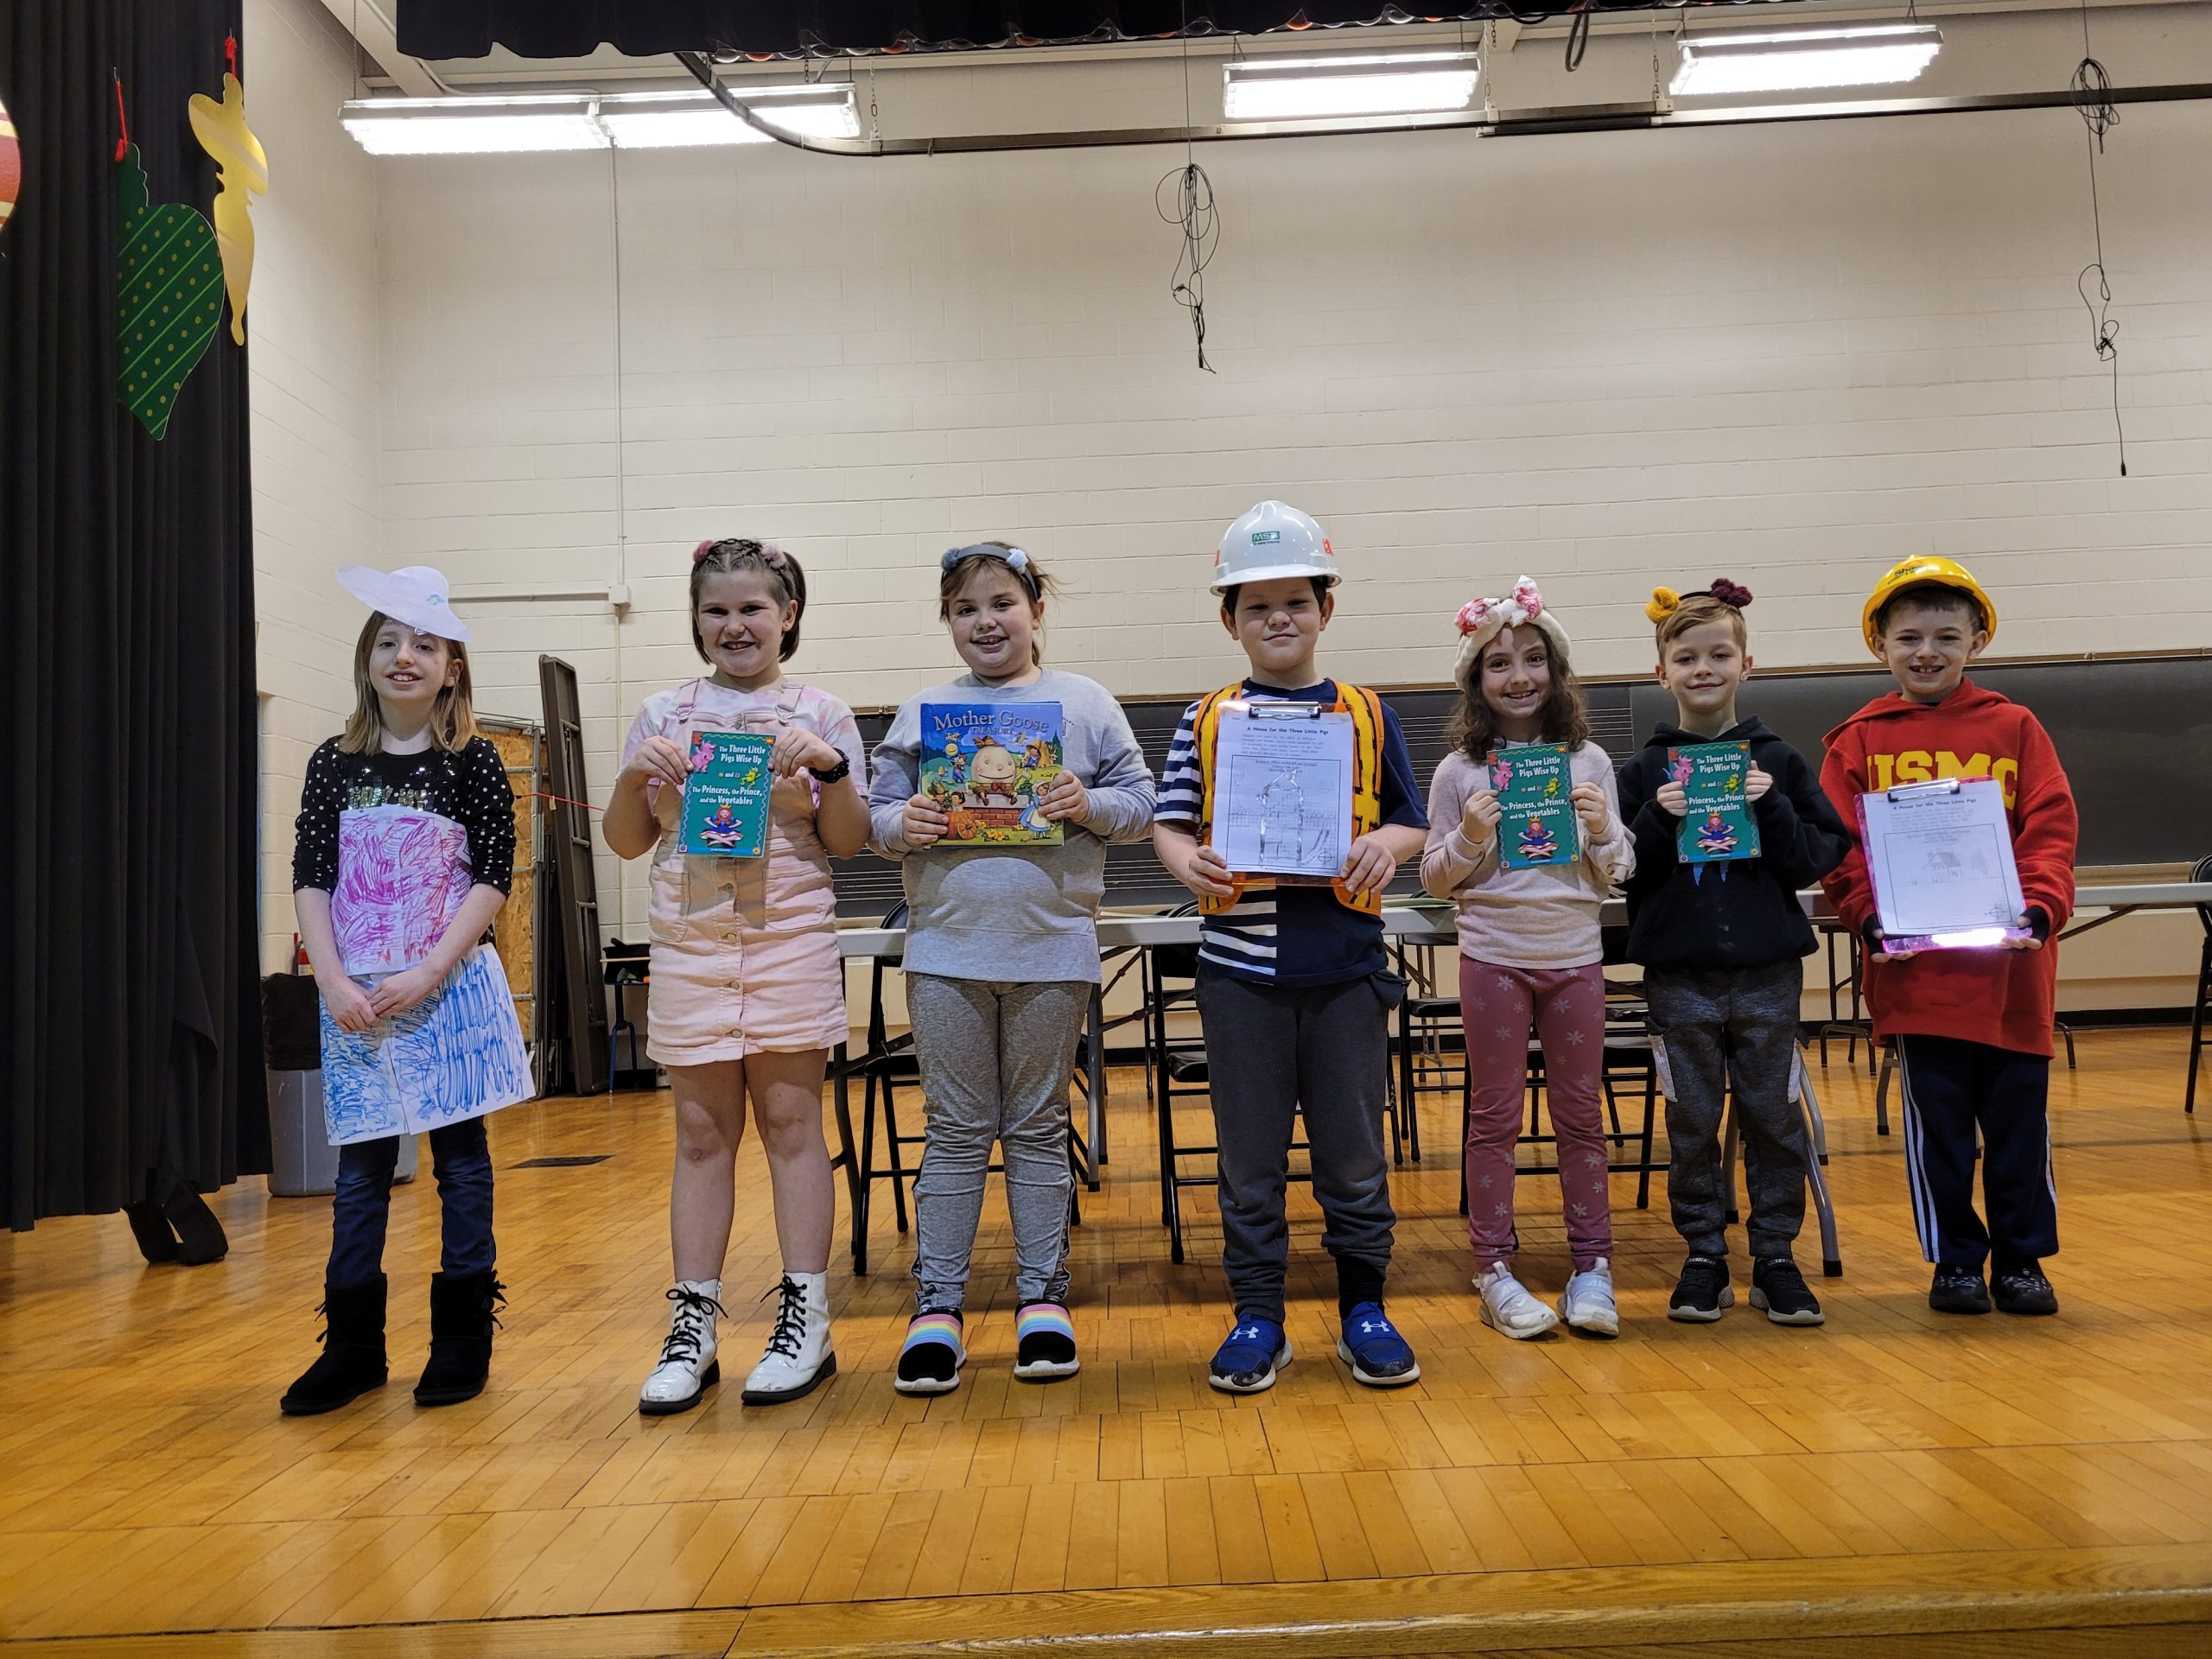 3rd grade students participated in a reader’s theater “The Three Little Pigs Wise Up”